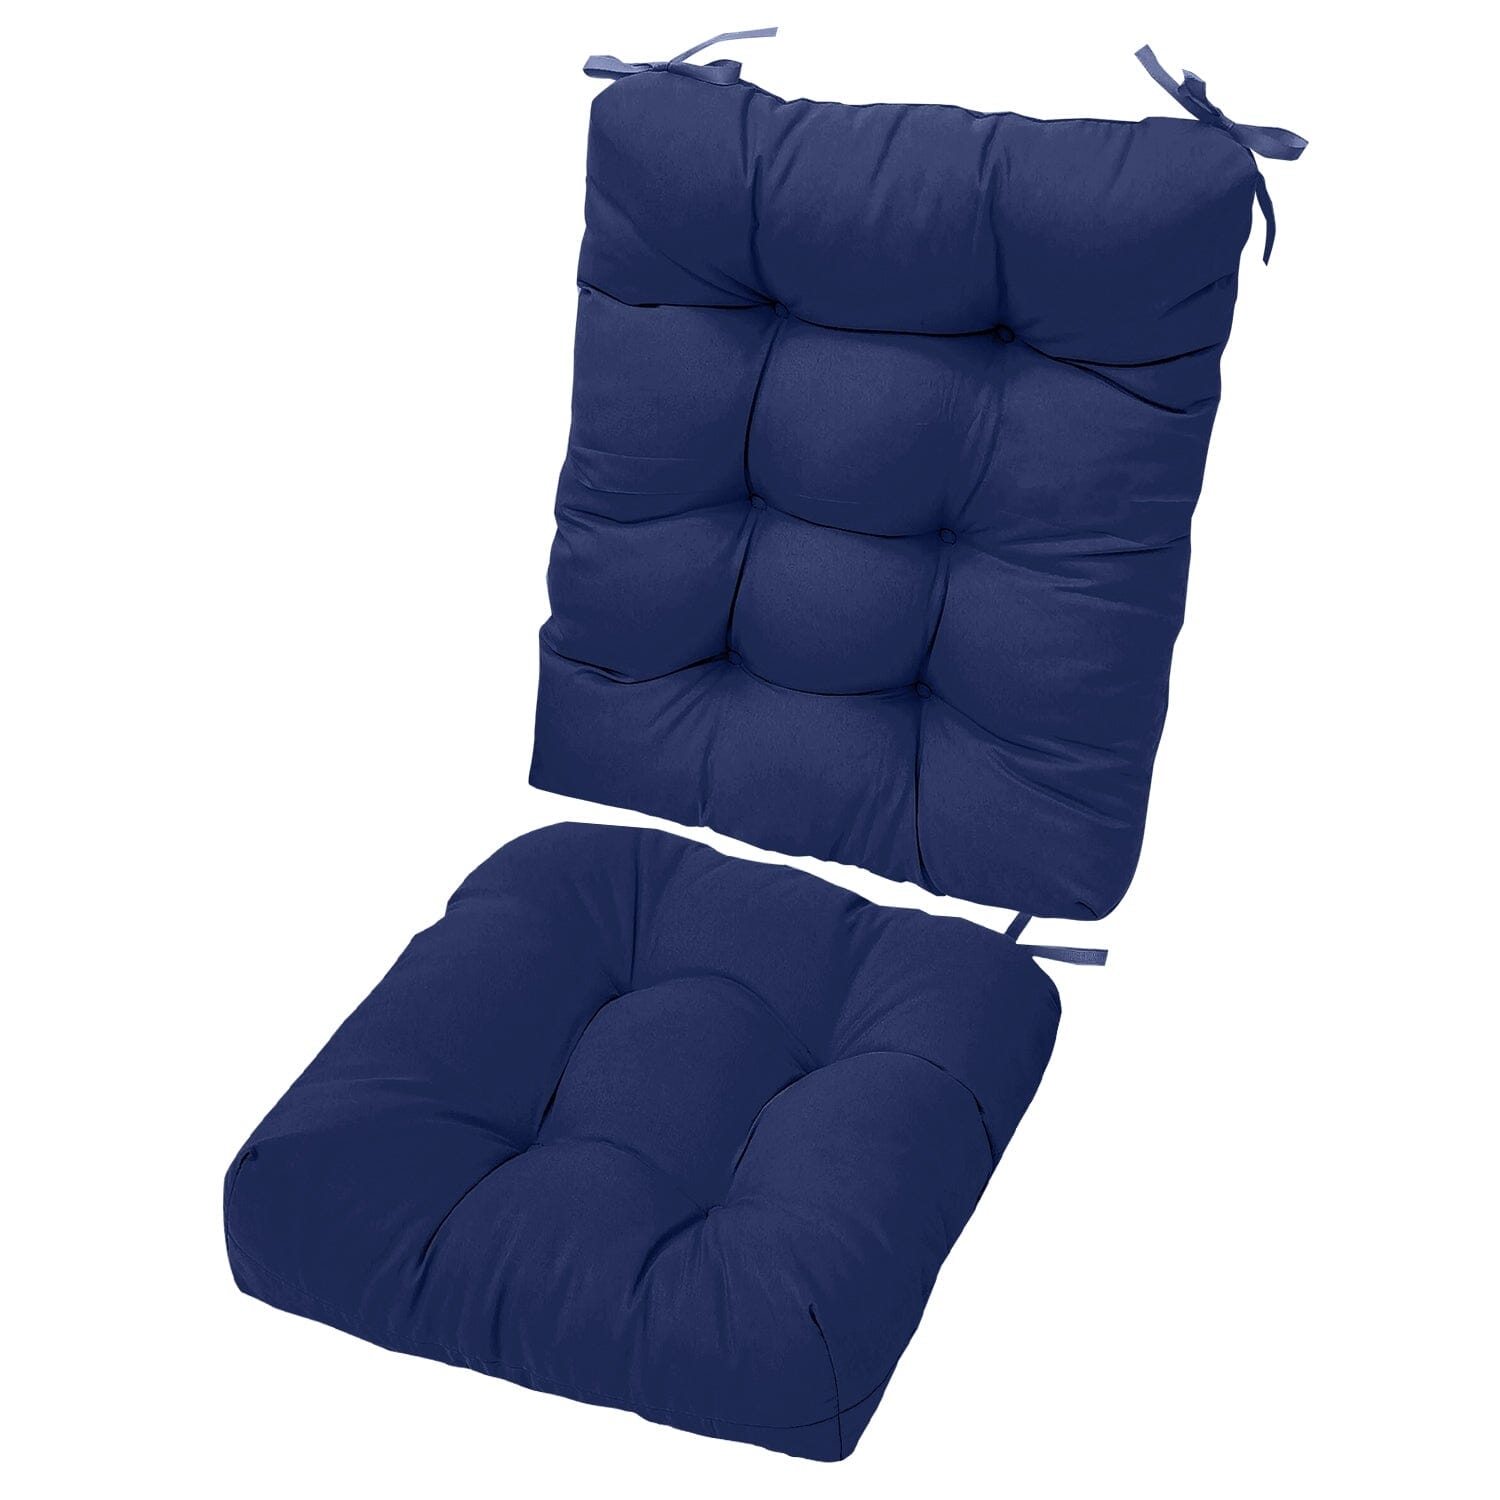 2-Piece Set: Rocking Chair Cushion with Non-Slip Ties Polyester Fiber Filling